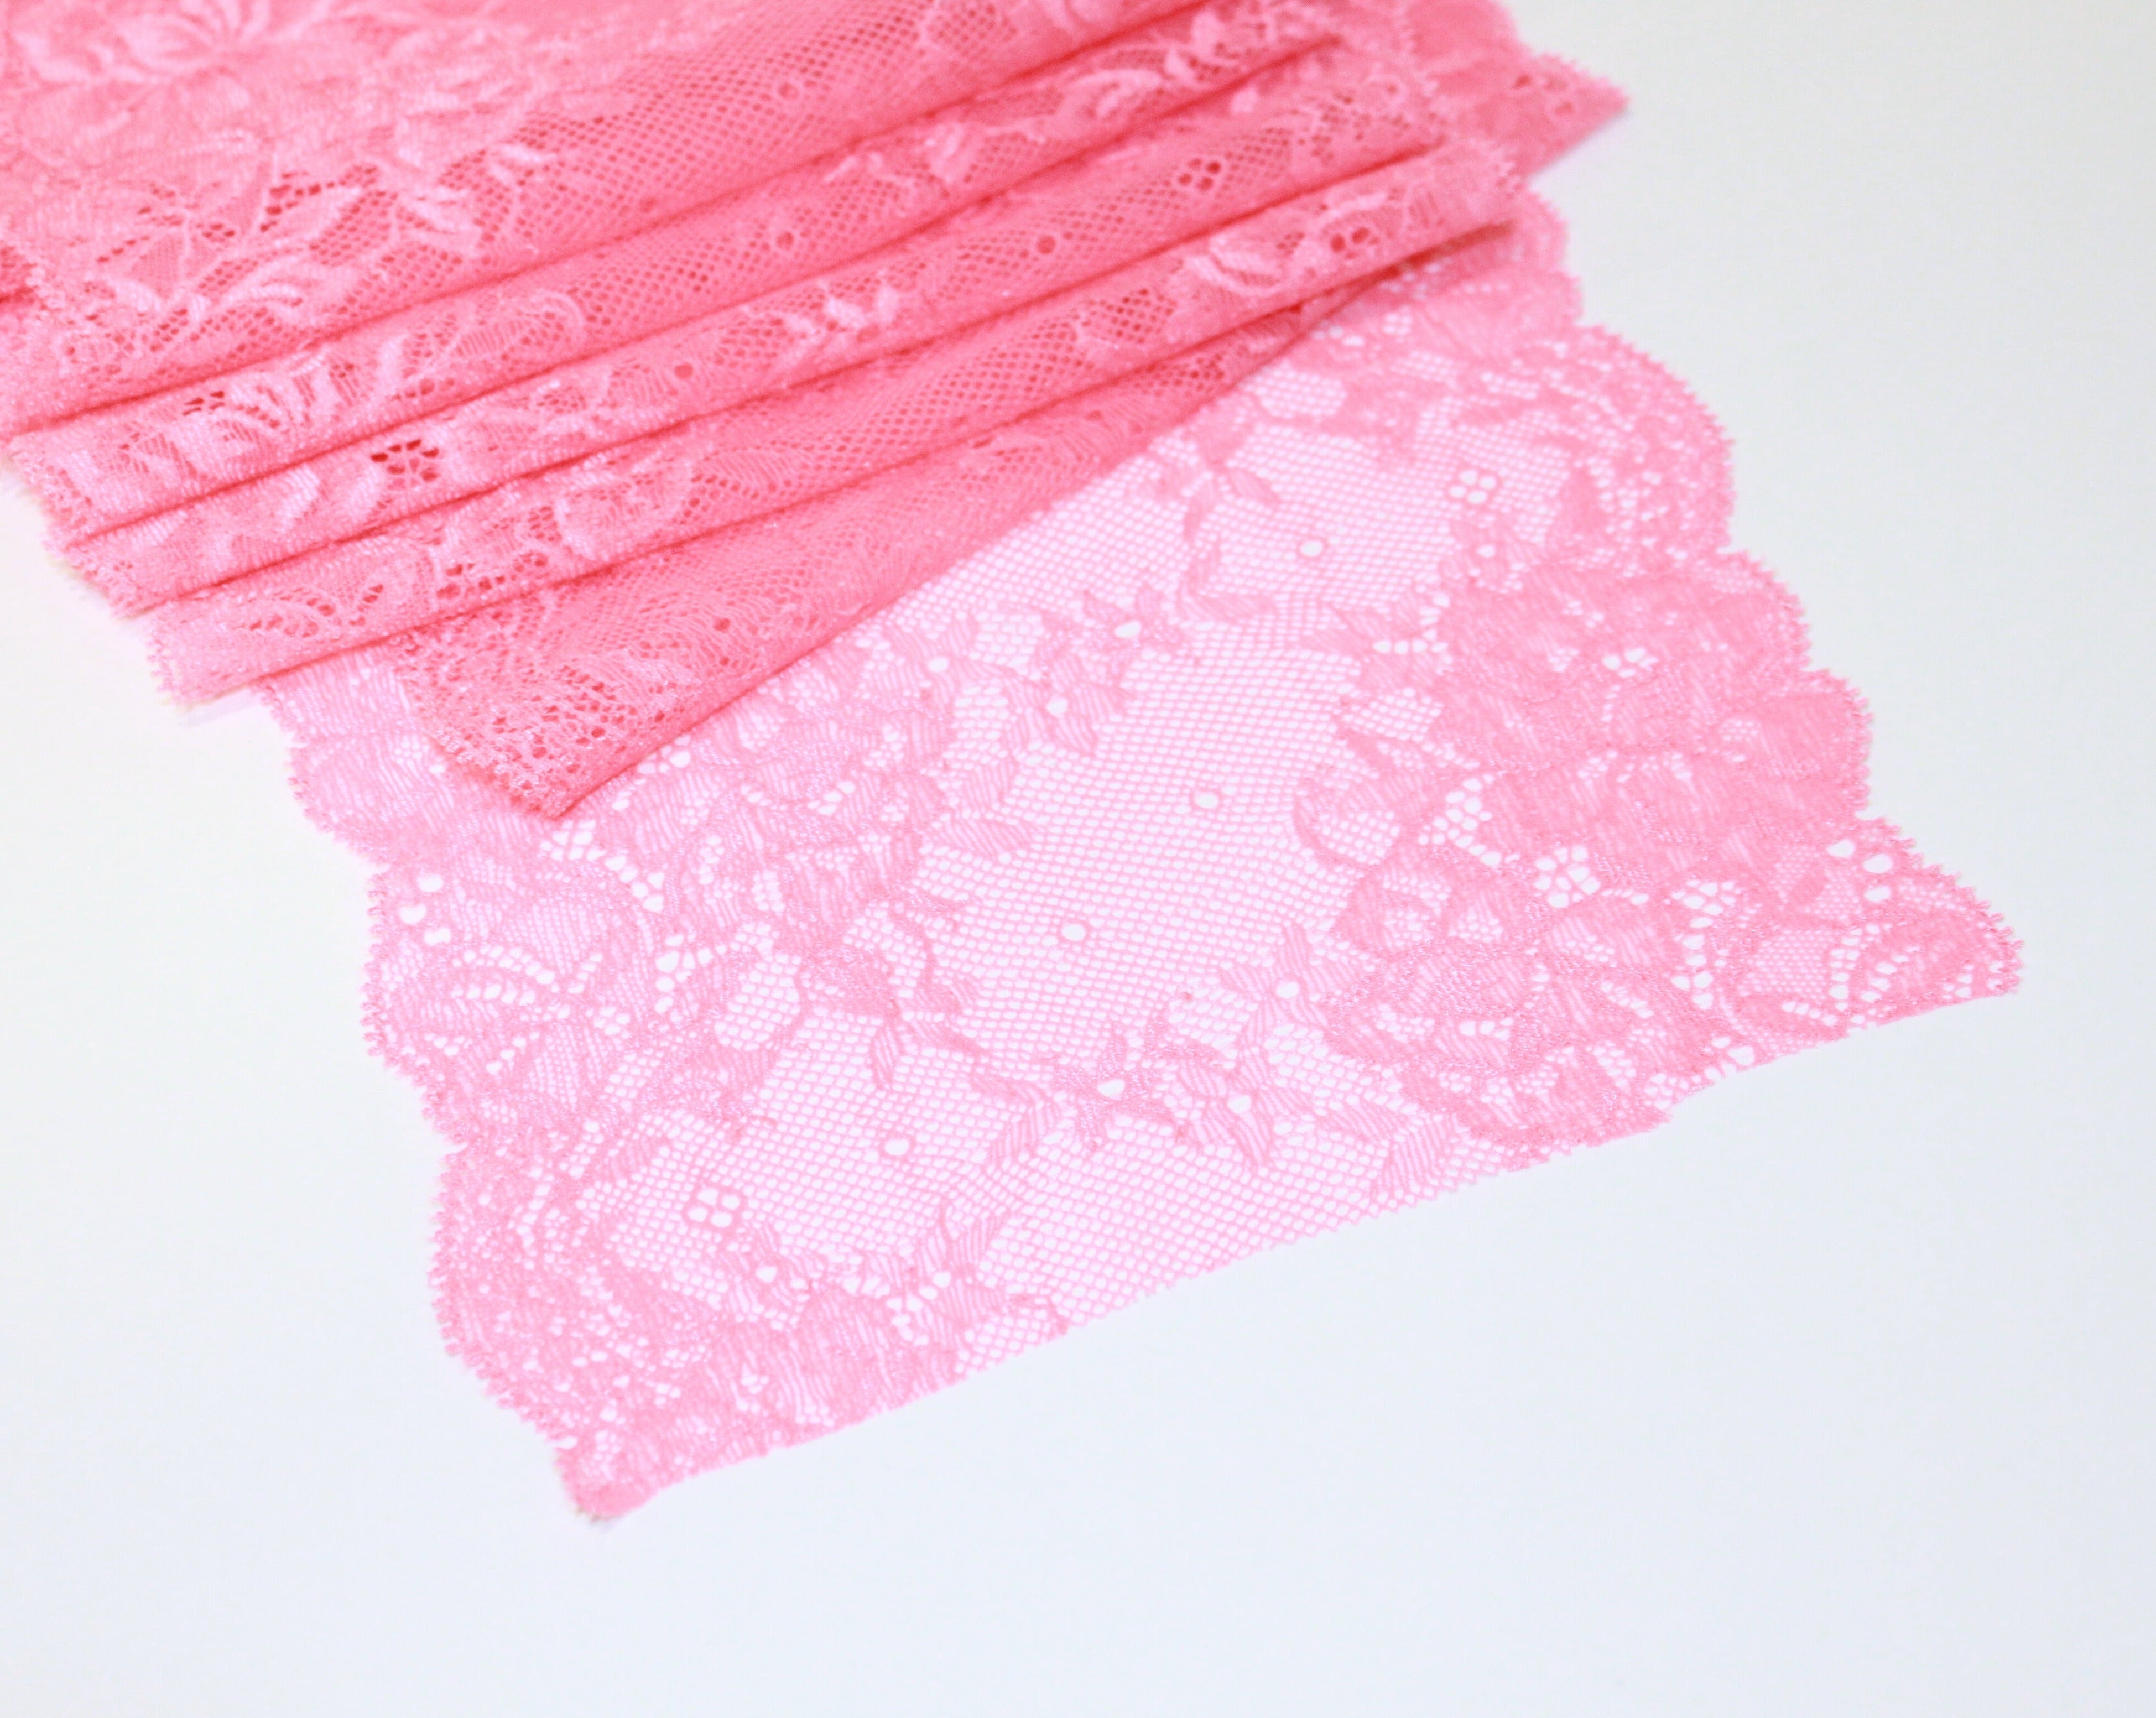 Gentle Pink Lace Bra On Bed Stock Photo 2364017481